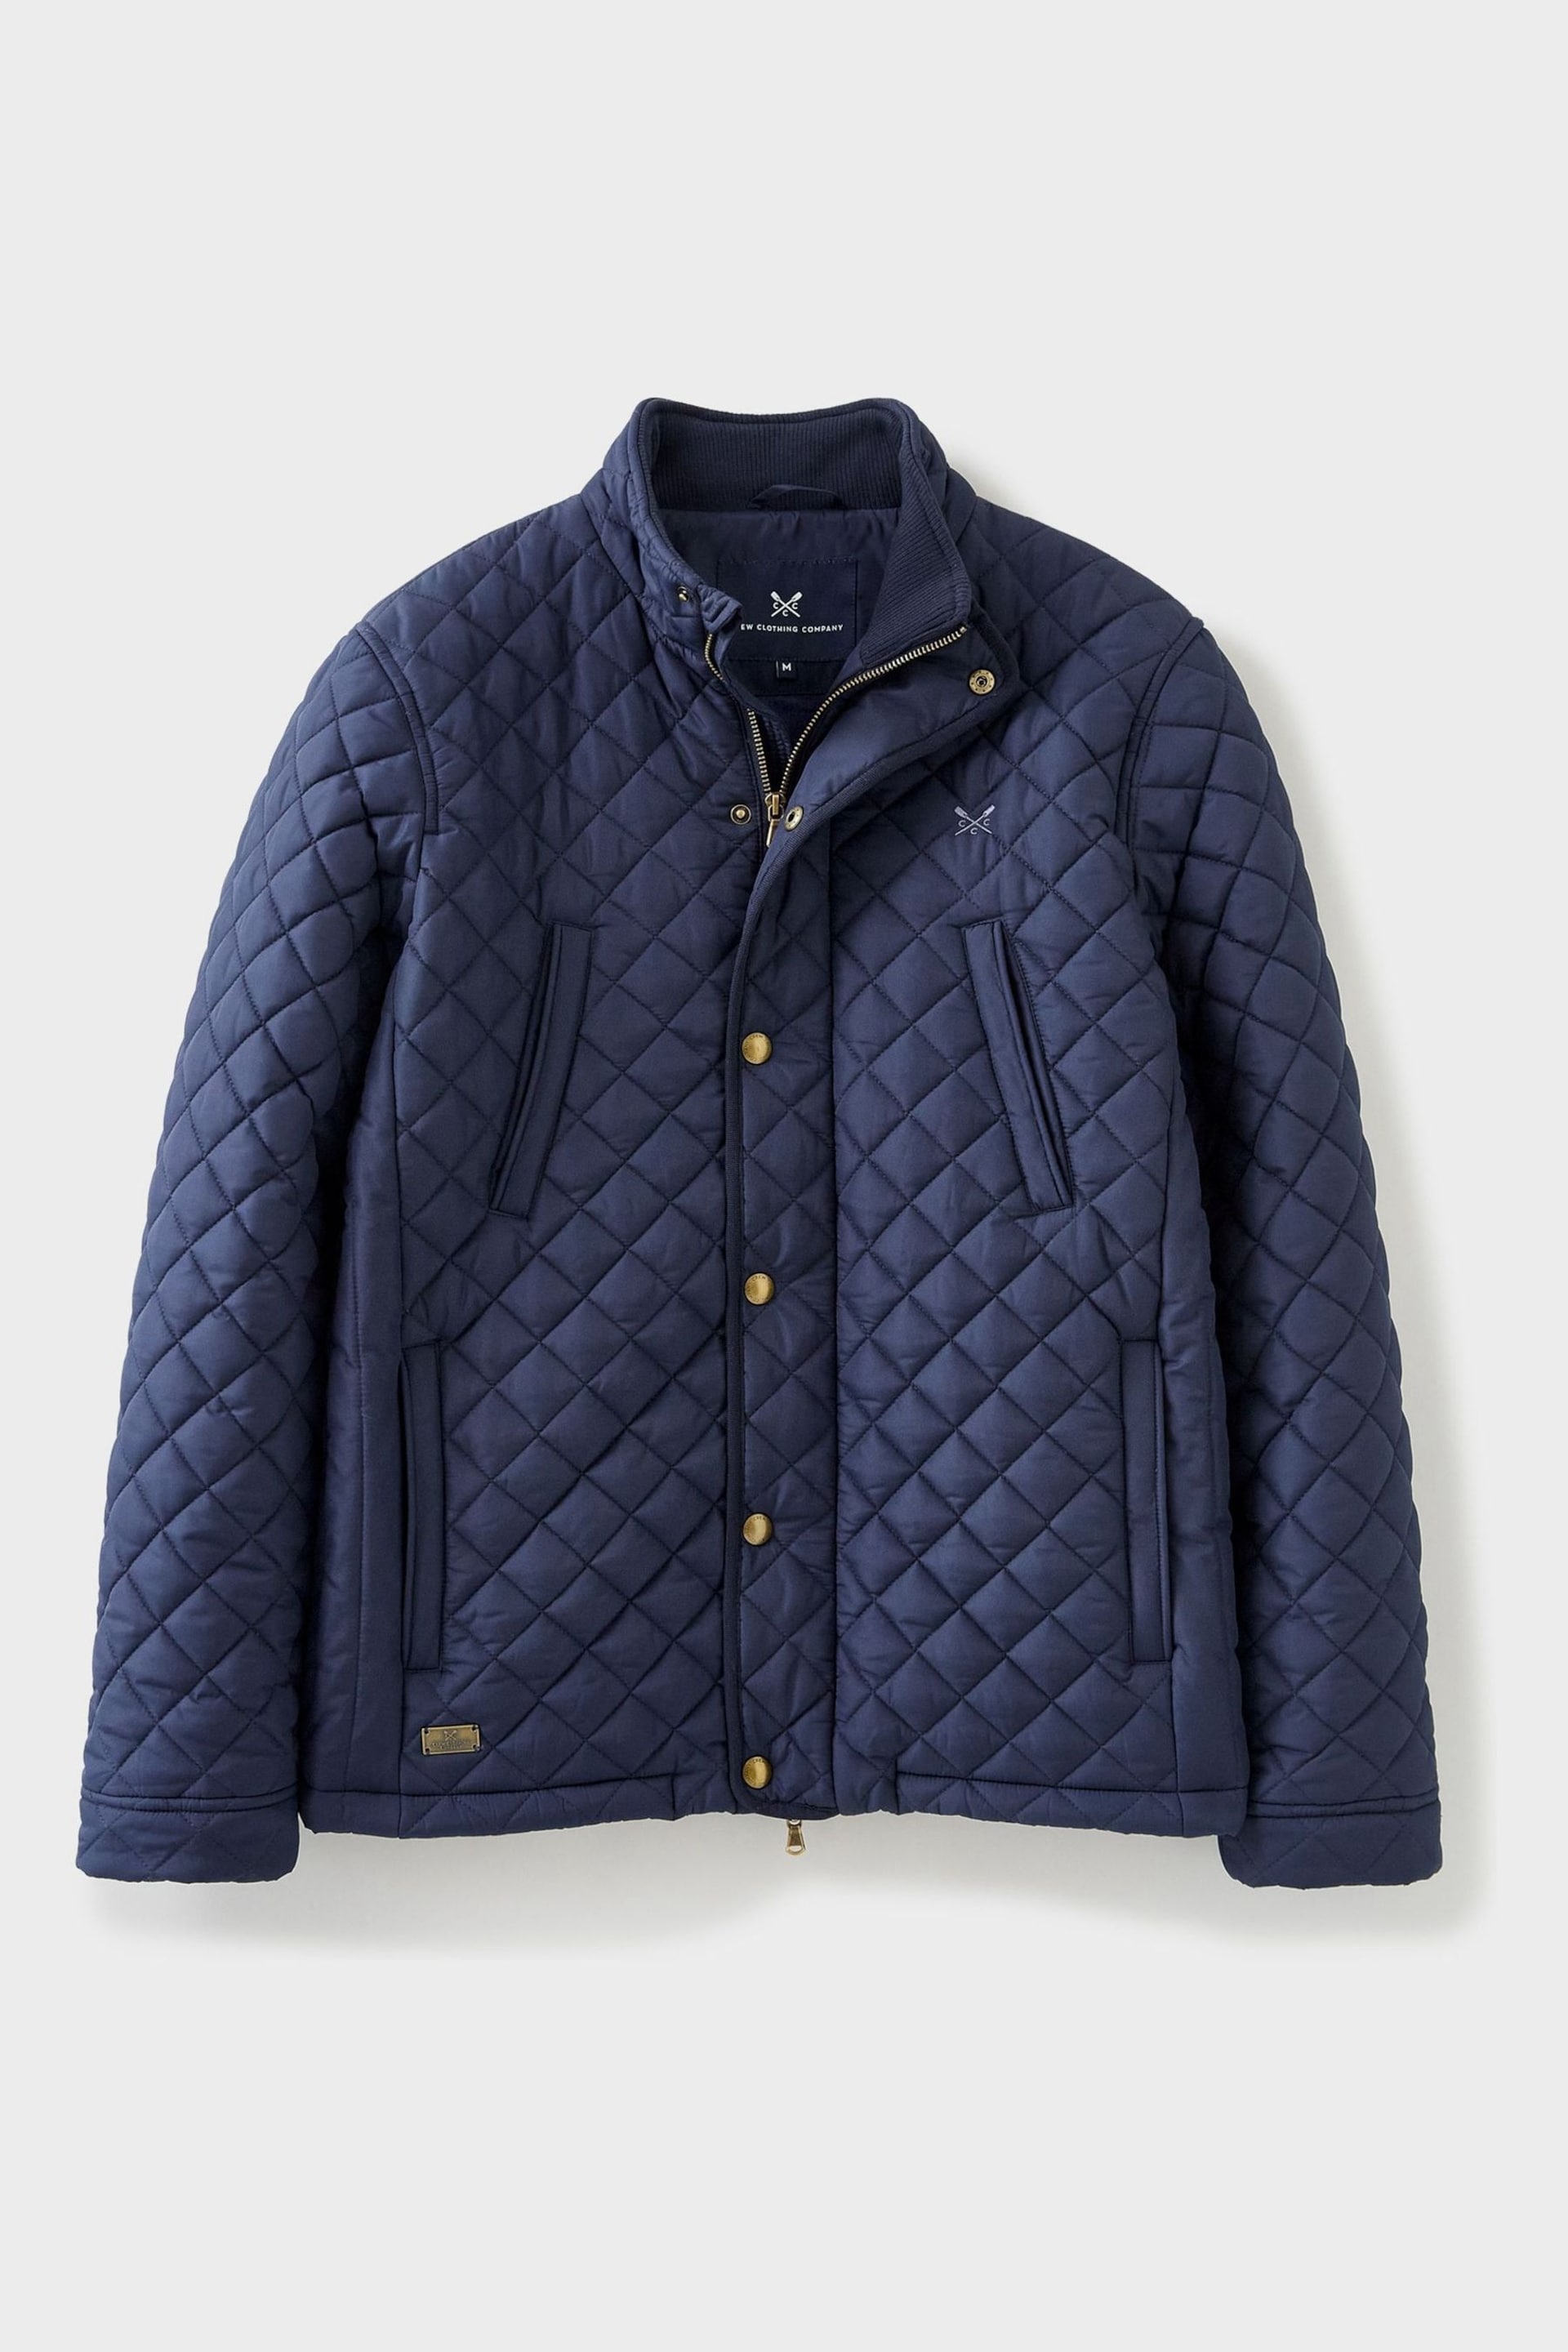 Crew Clothing Company Navy Blue Classic Casual Jacket - Image 5 of 5